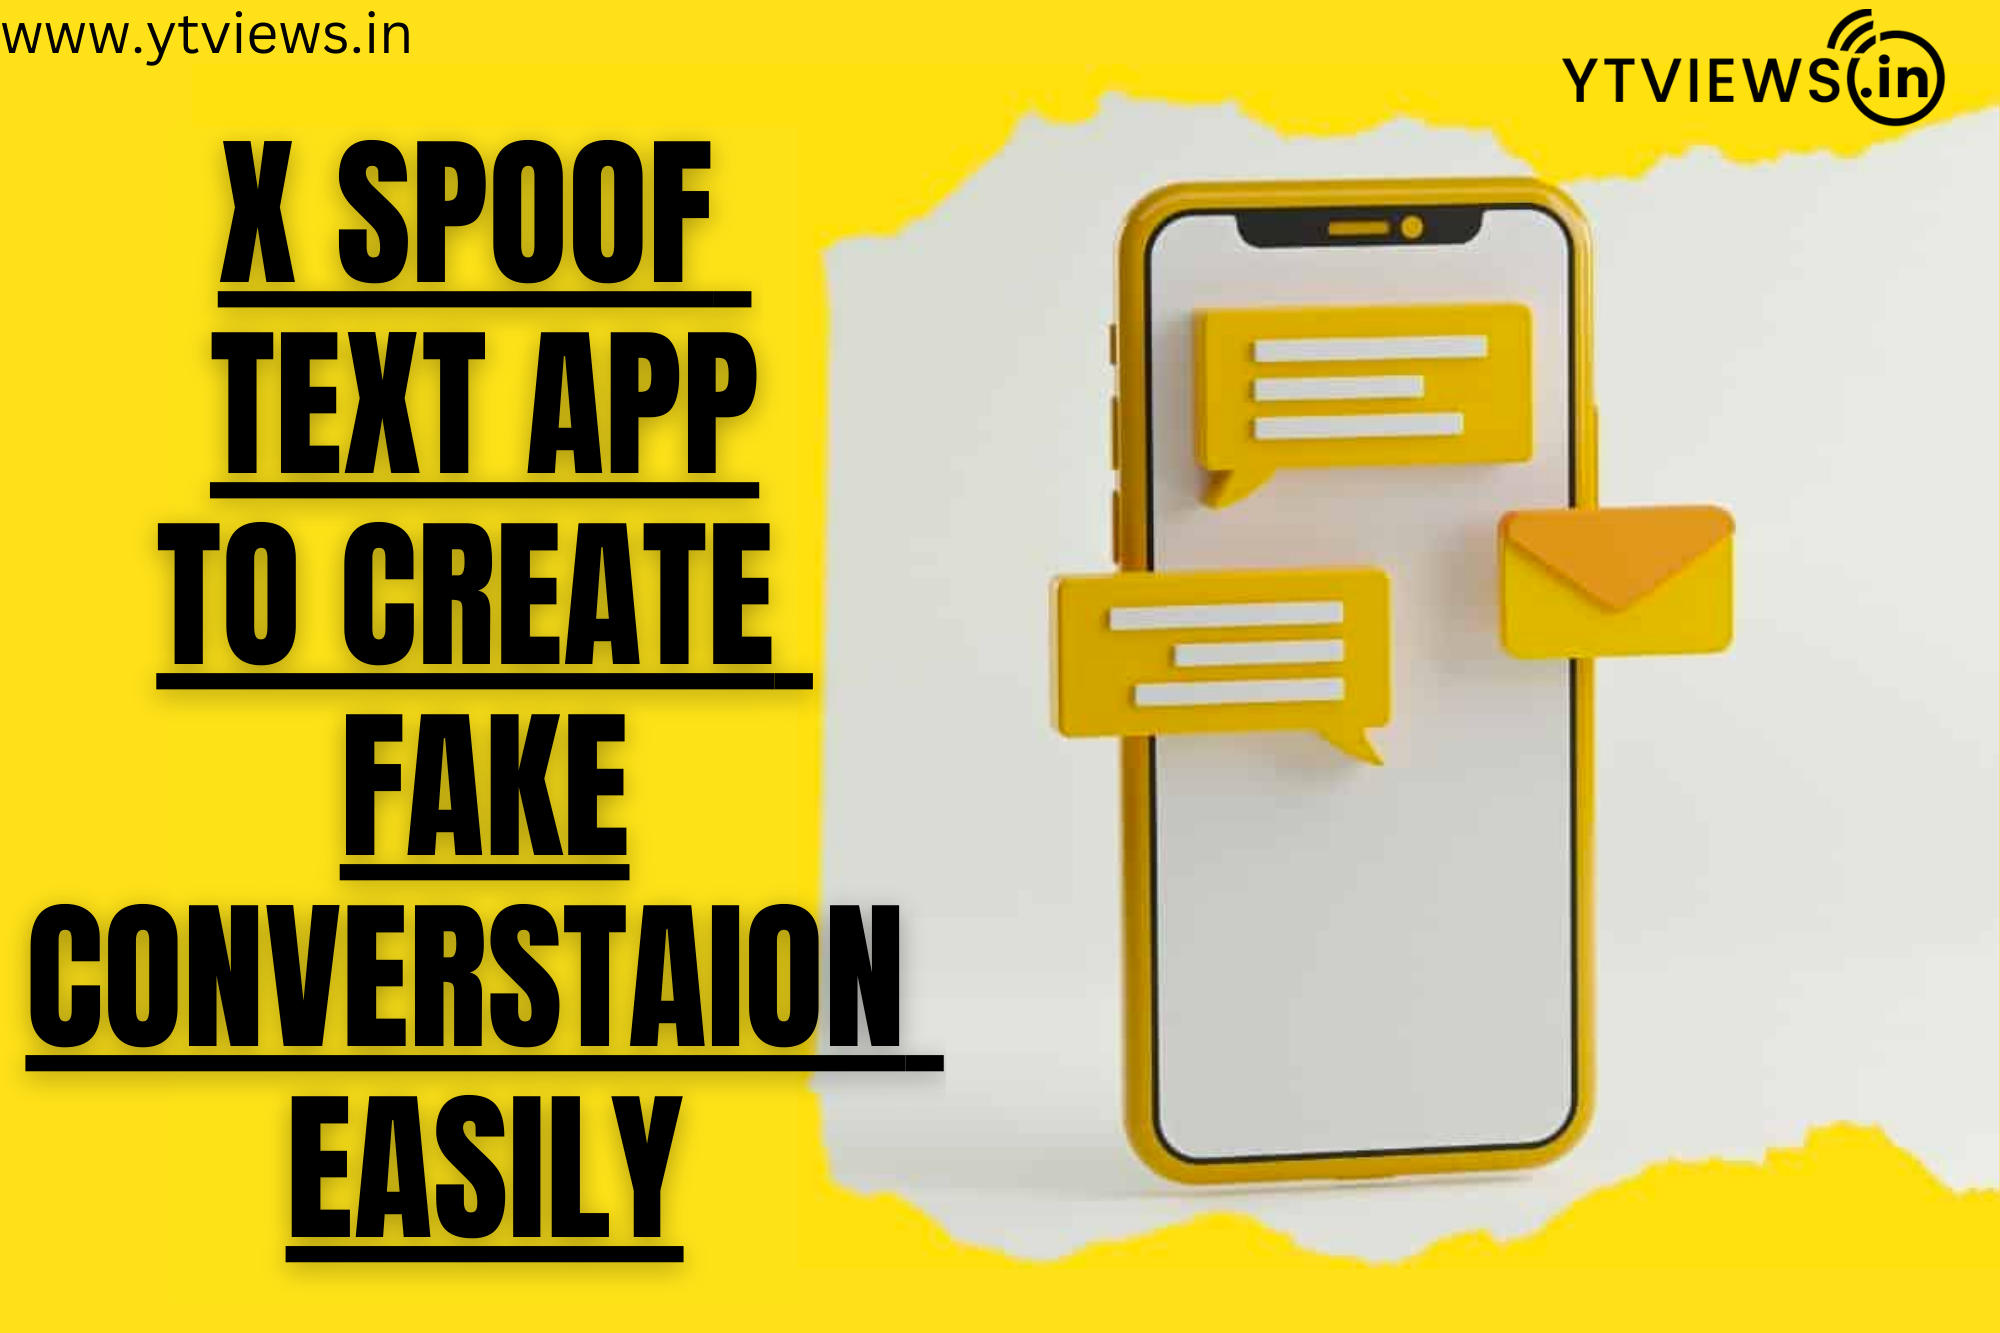 X SPOOF TEXT APPS TO CREATE FAKE CONVERSATIONS EASILY